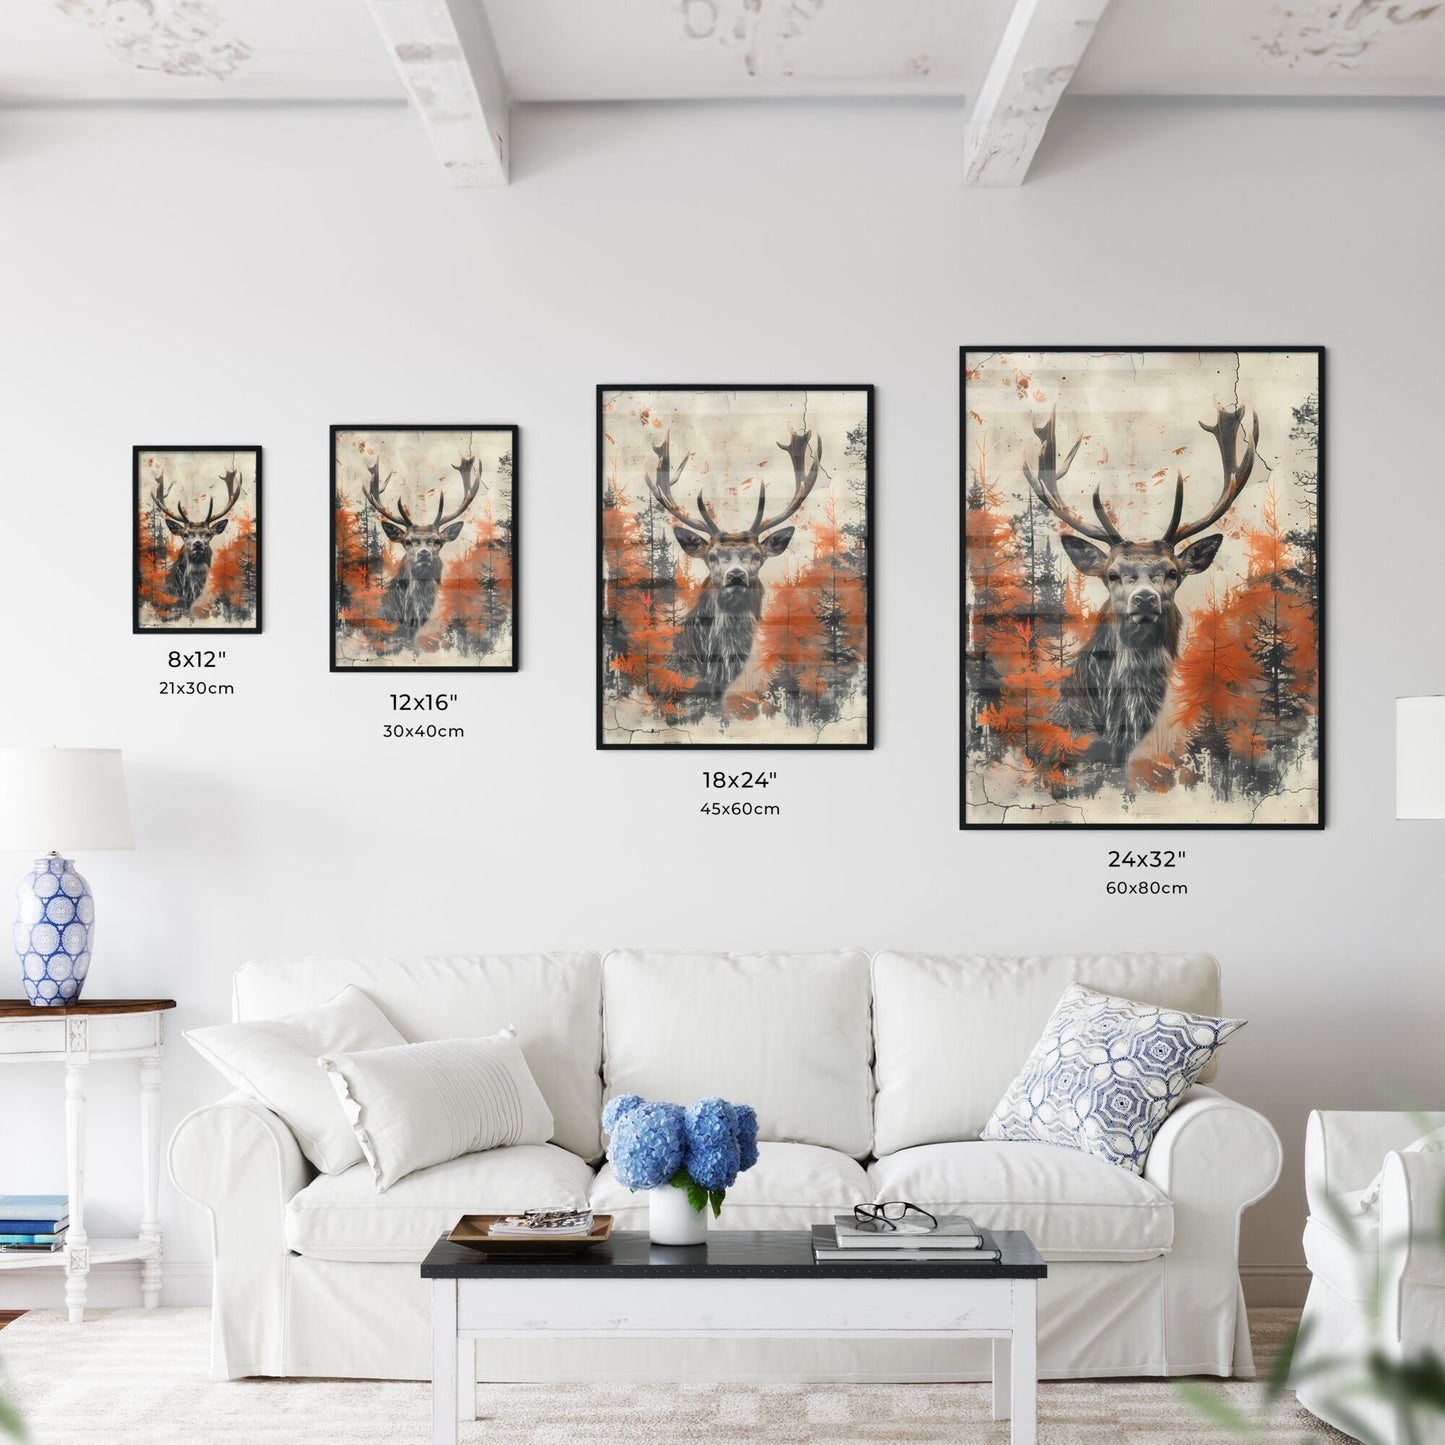 Intricate Baroque Deer Painting: Vibrant Artwork Depicting Stag in Forest with Dynamic Composition Default Title